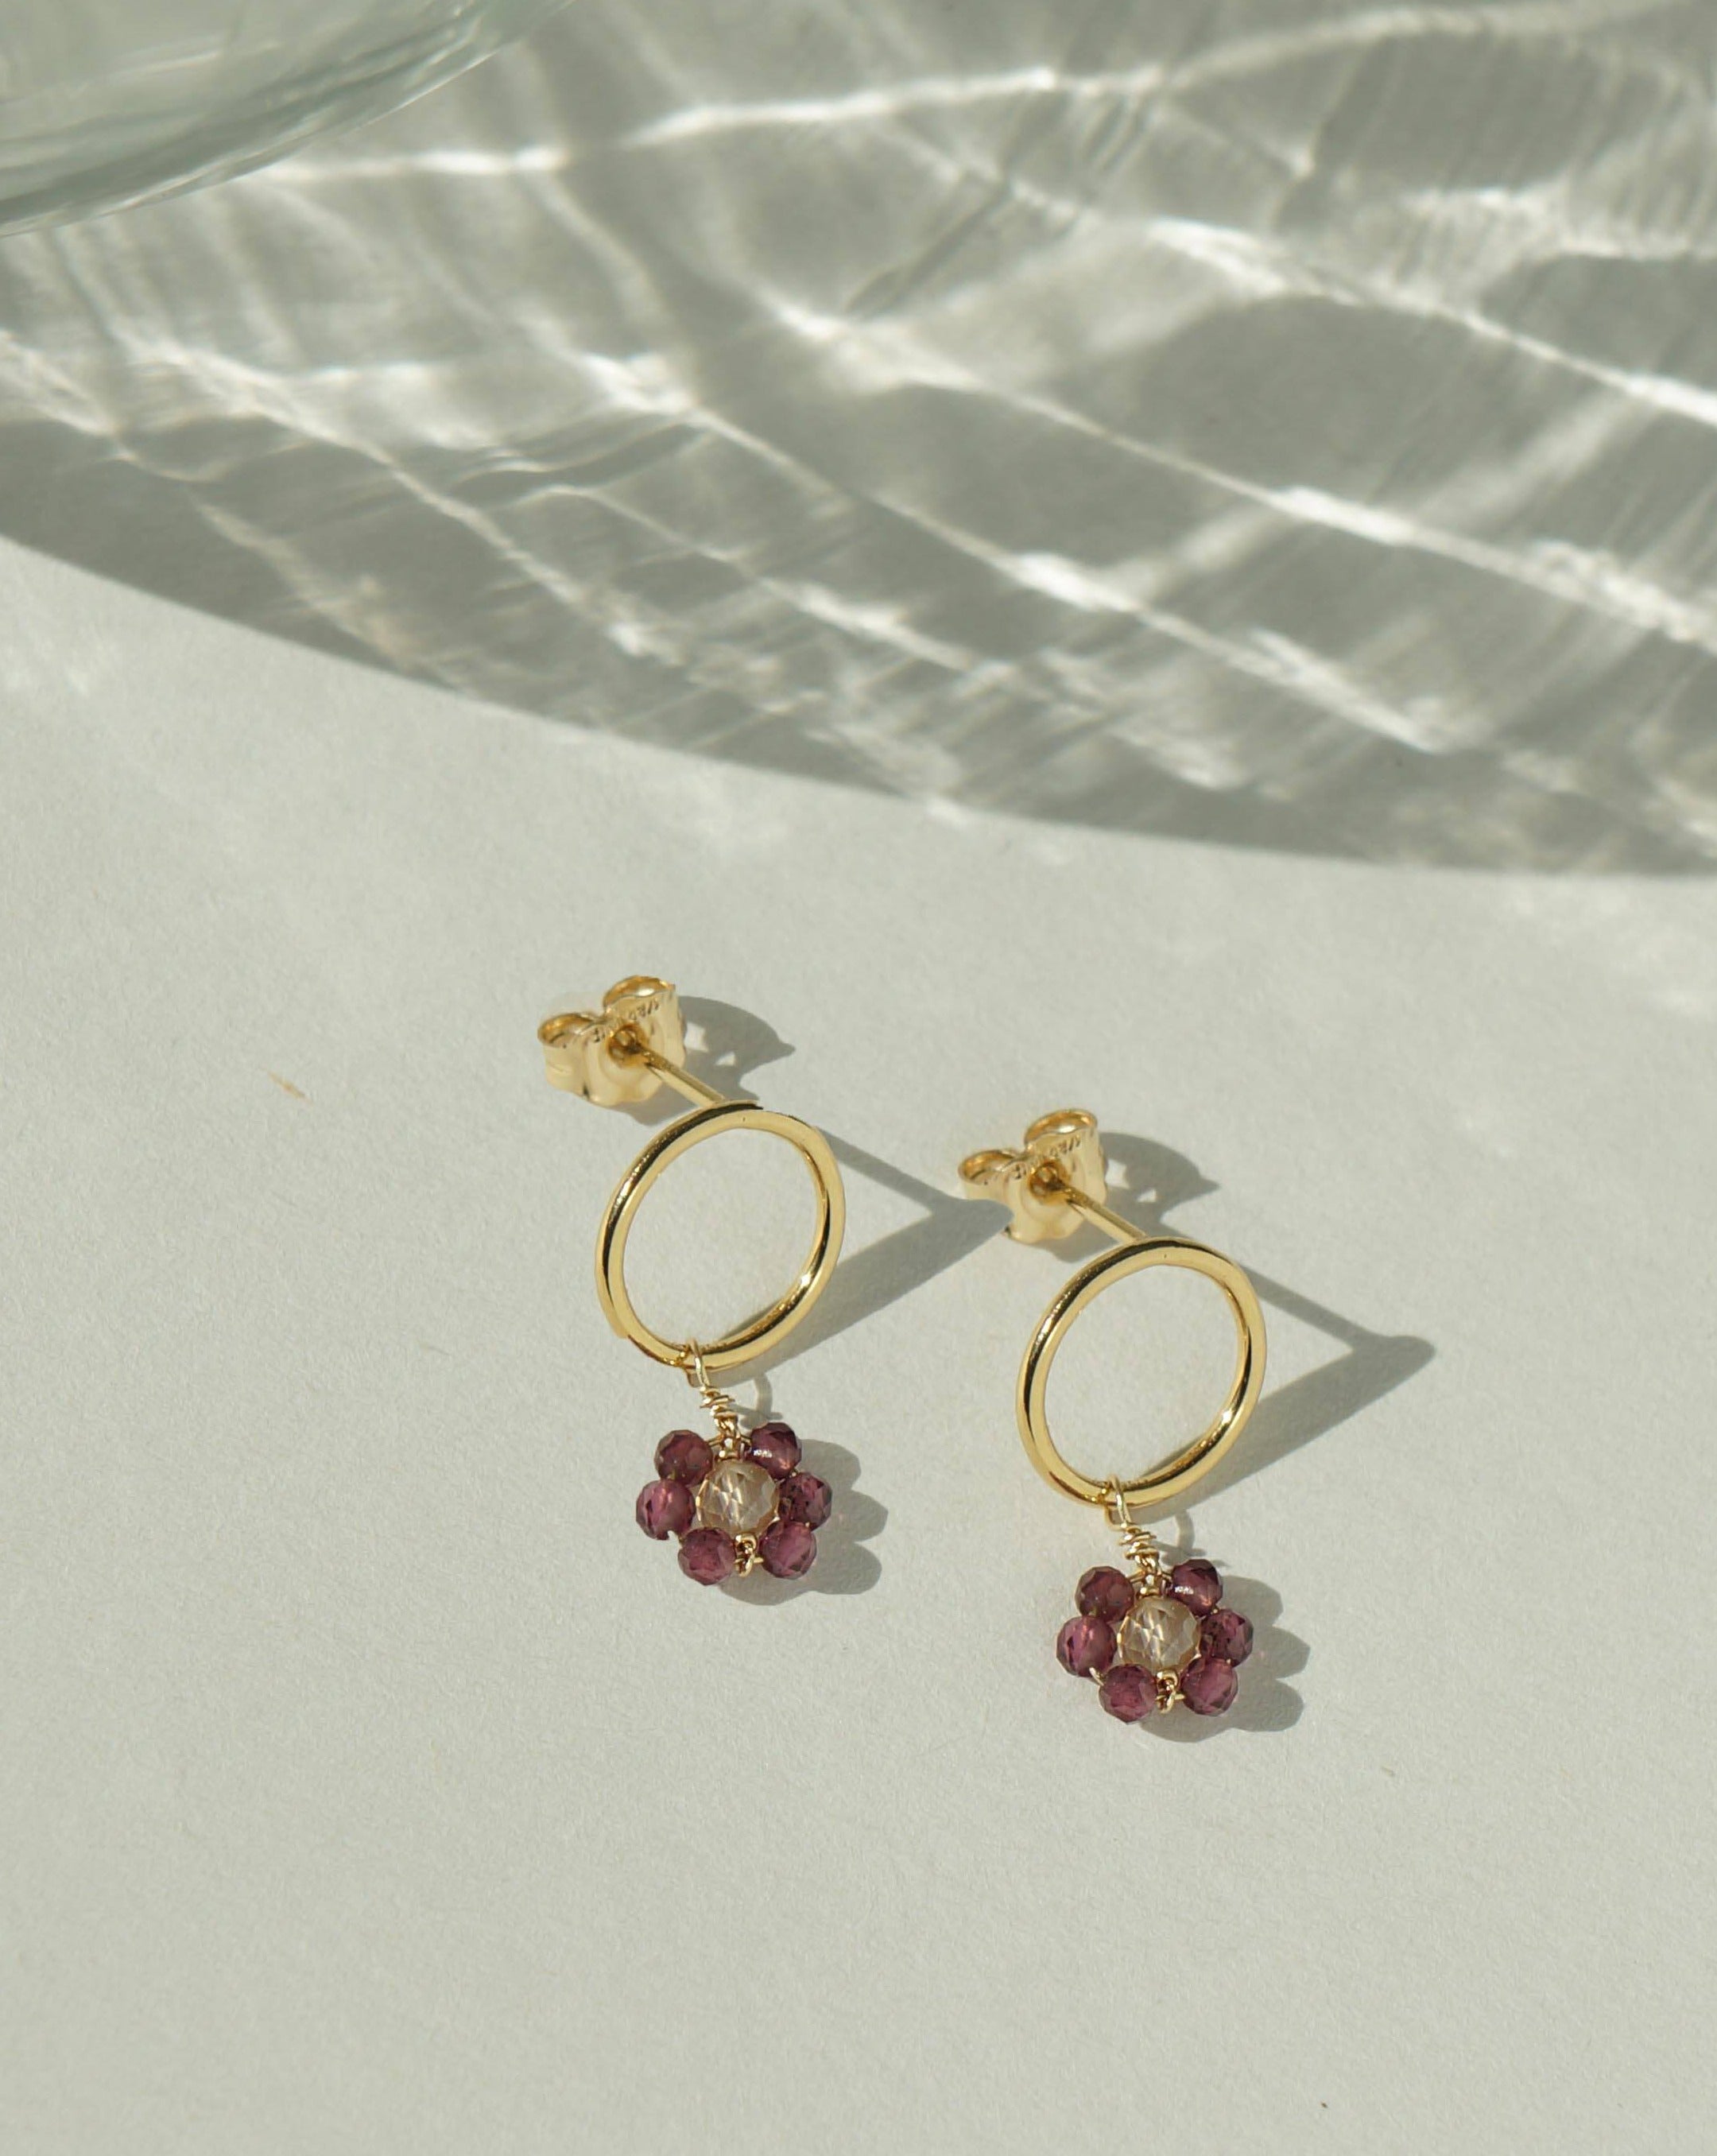 Florcitas Earrings by KOZAKH. 10mm circle studs, crafted in 14K Gold Filled, featuring 2mm Garnet gems and 3mm Imperial Topaz forming a daisy.